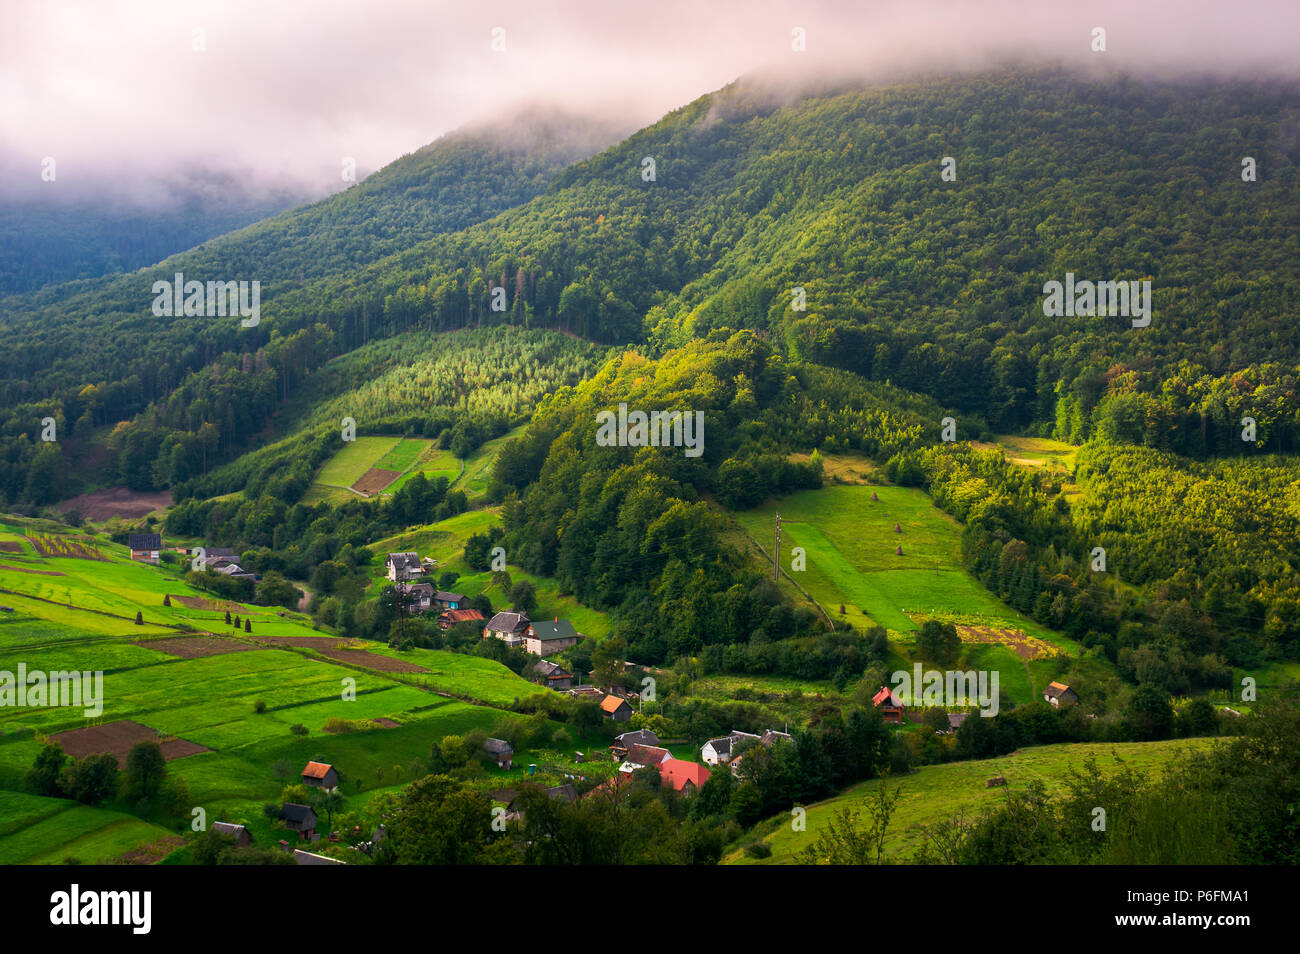 Abranka village in Carpathian mountains. lovely rural scenery on a cloudy sunrise. Stock Photo